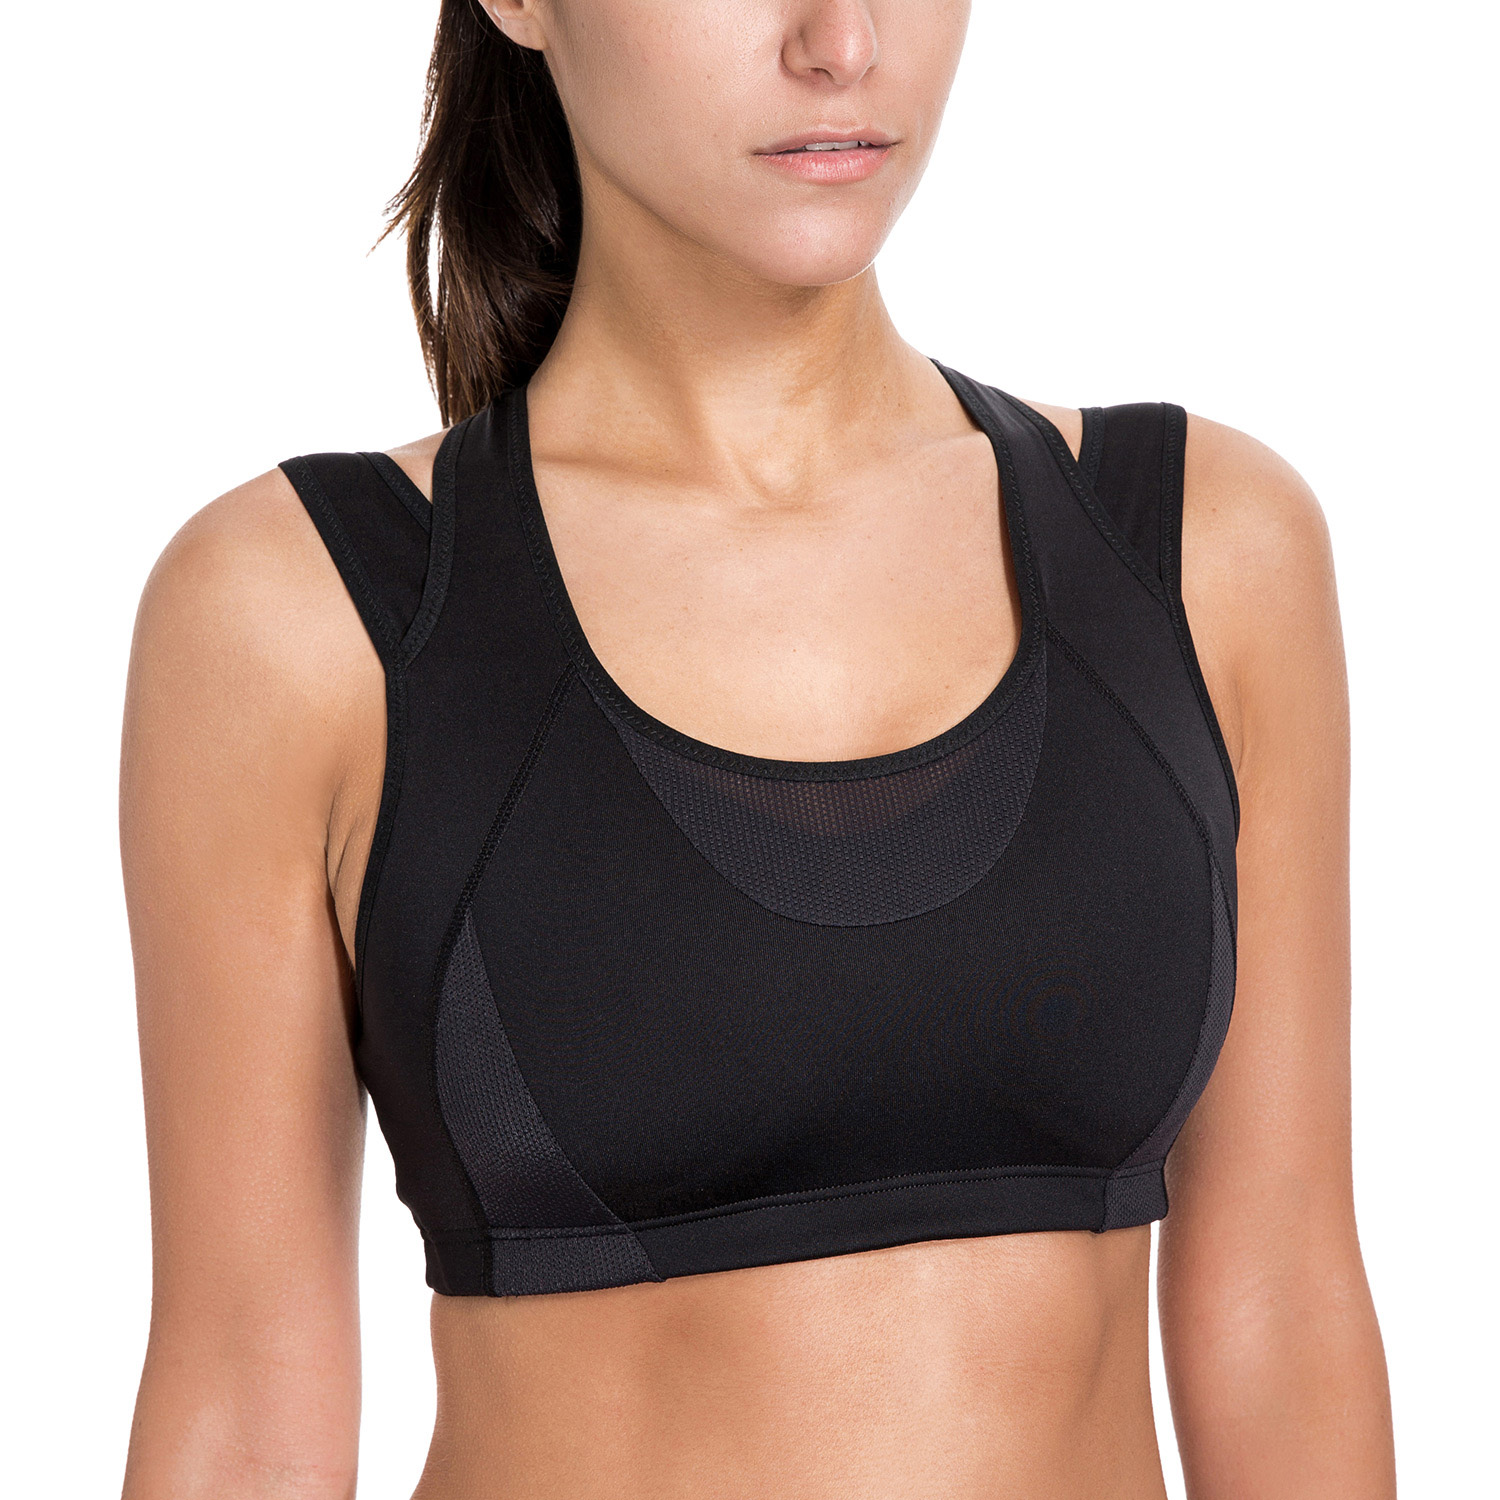 SYROKAN Women S Sports Bra High Impact Double Layer Wirefree Padded